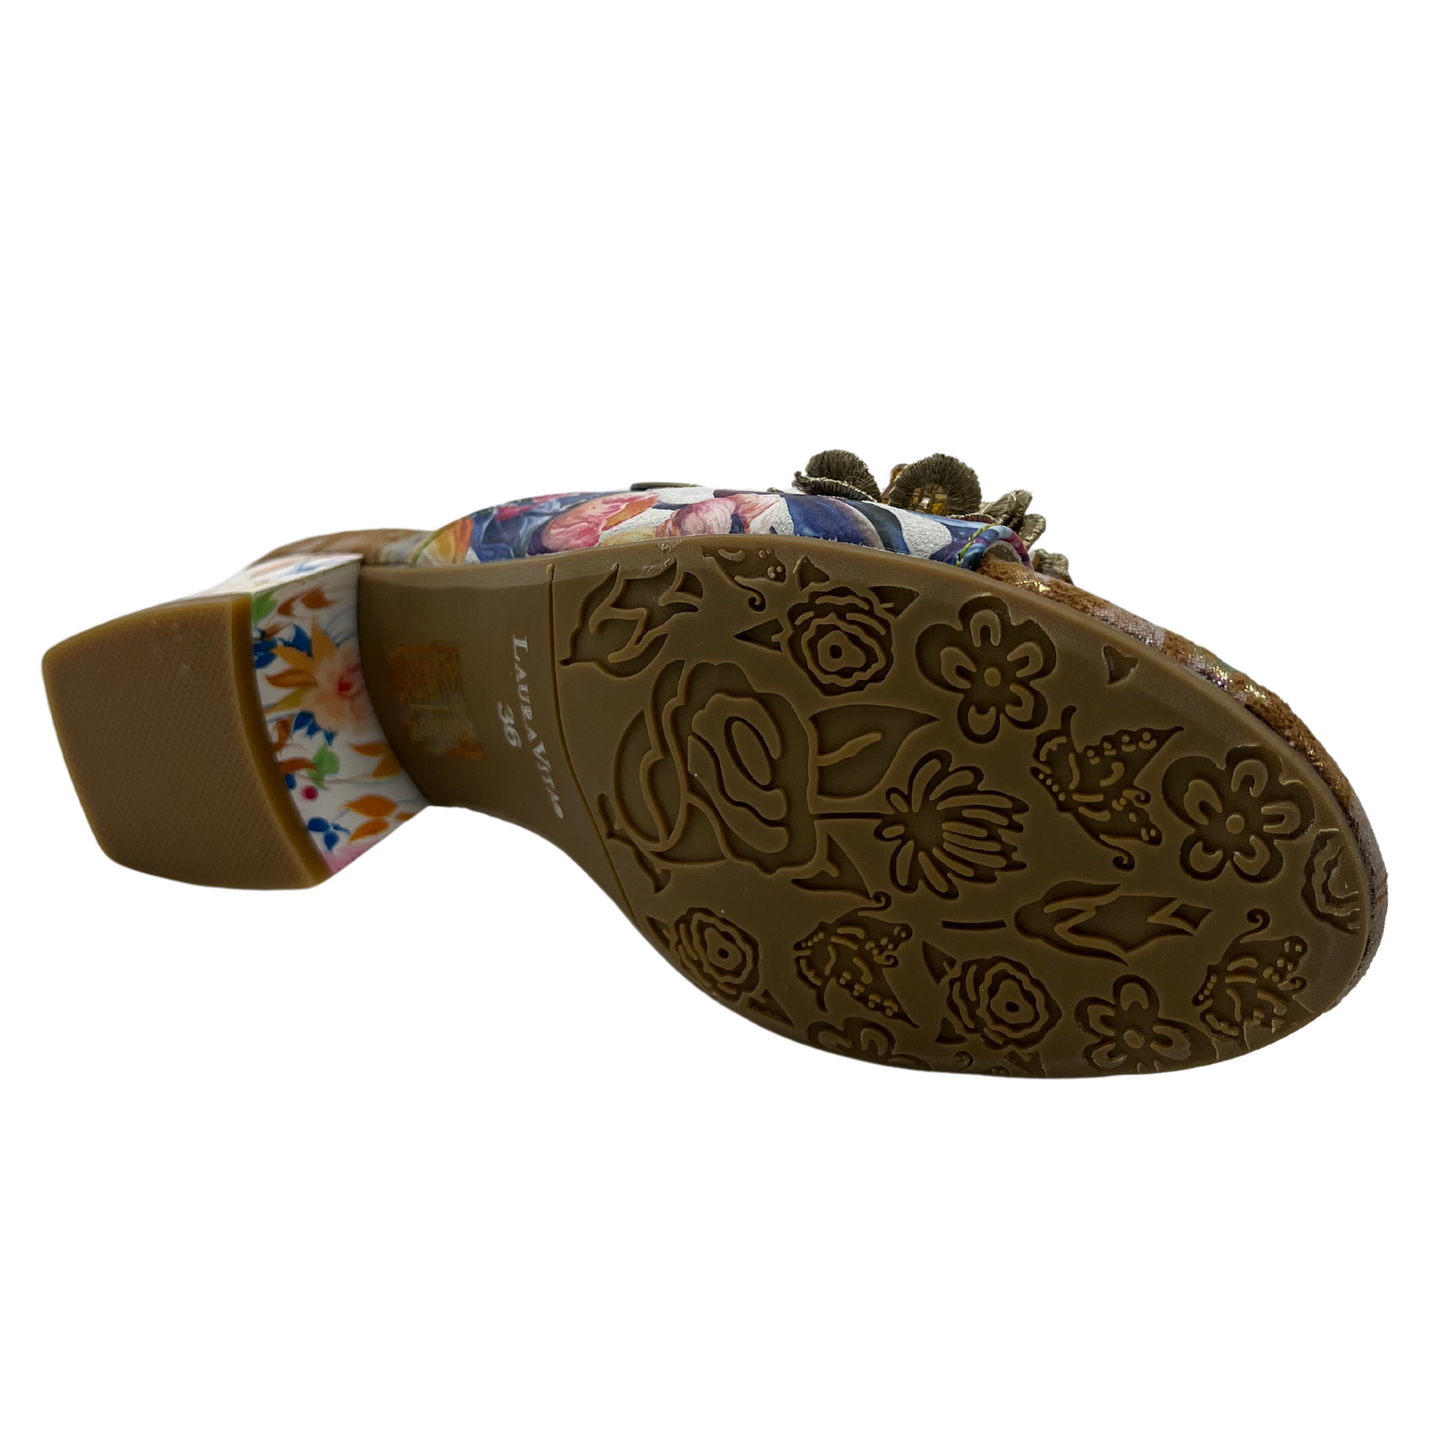 Bottom view of floral slip on sandal with flower accents on upper. Open toe and block heel